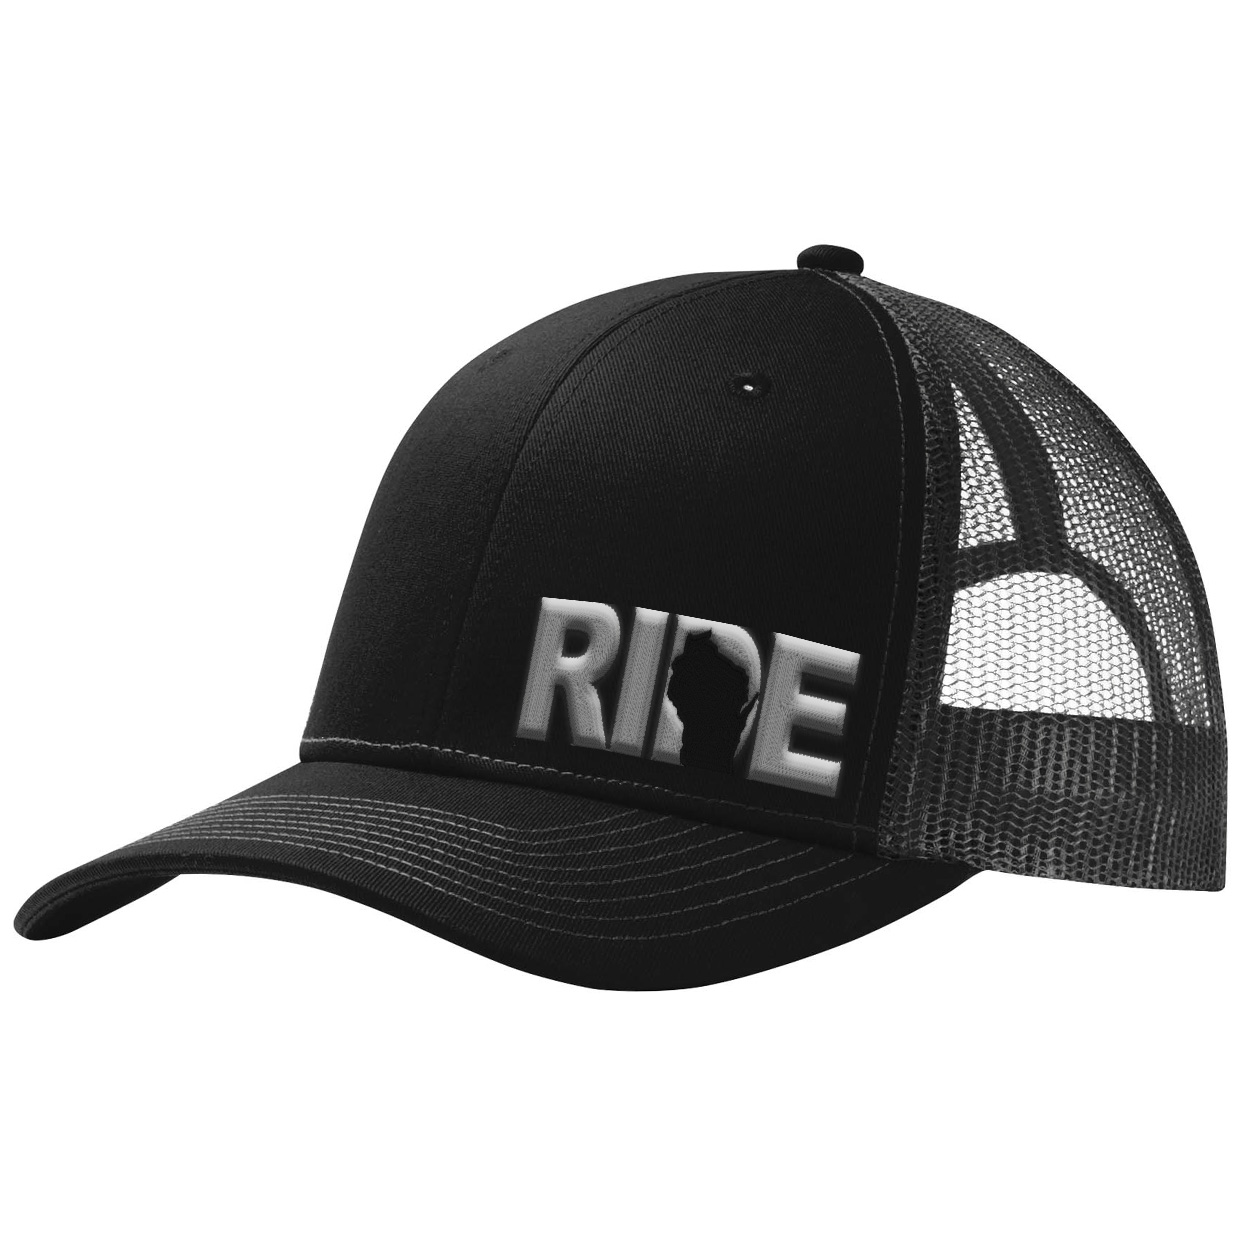 Ride Wisconsin Night Out Pro Embroidered Snapback Trucker Hat Black/Gray